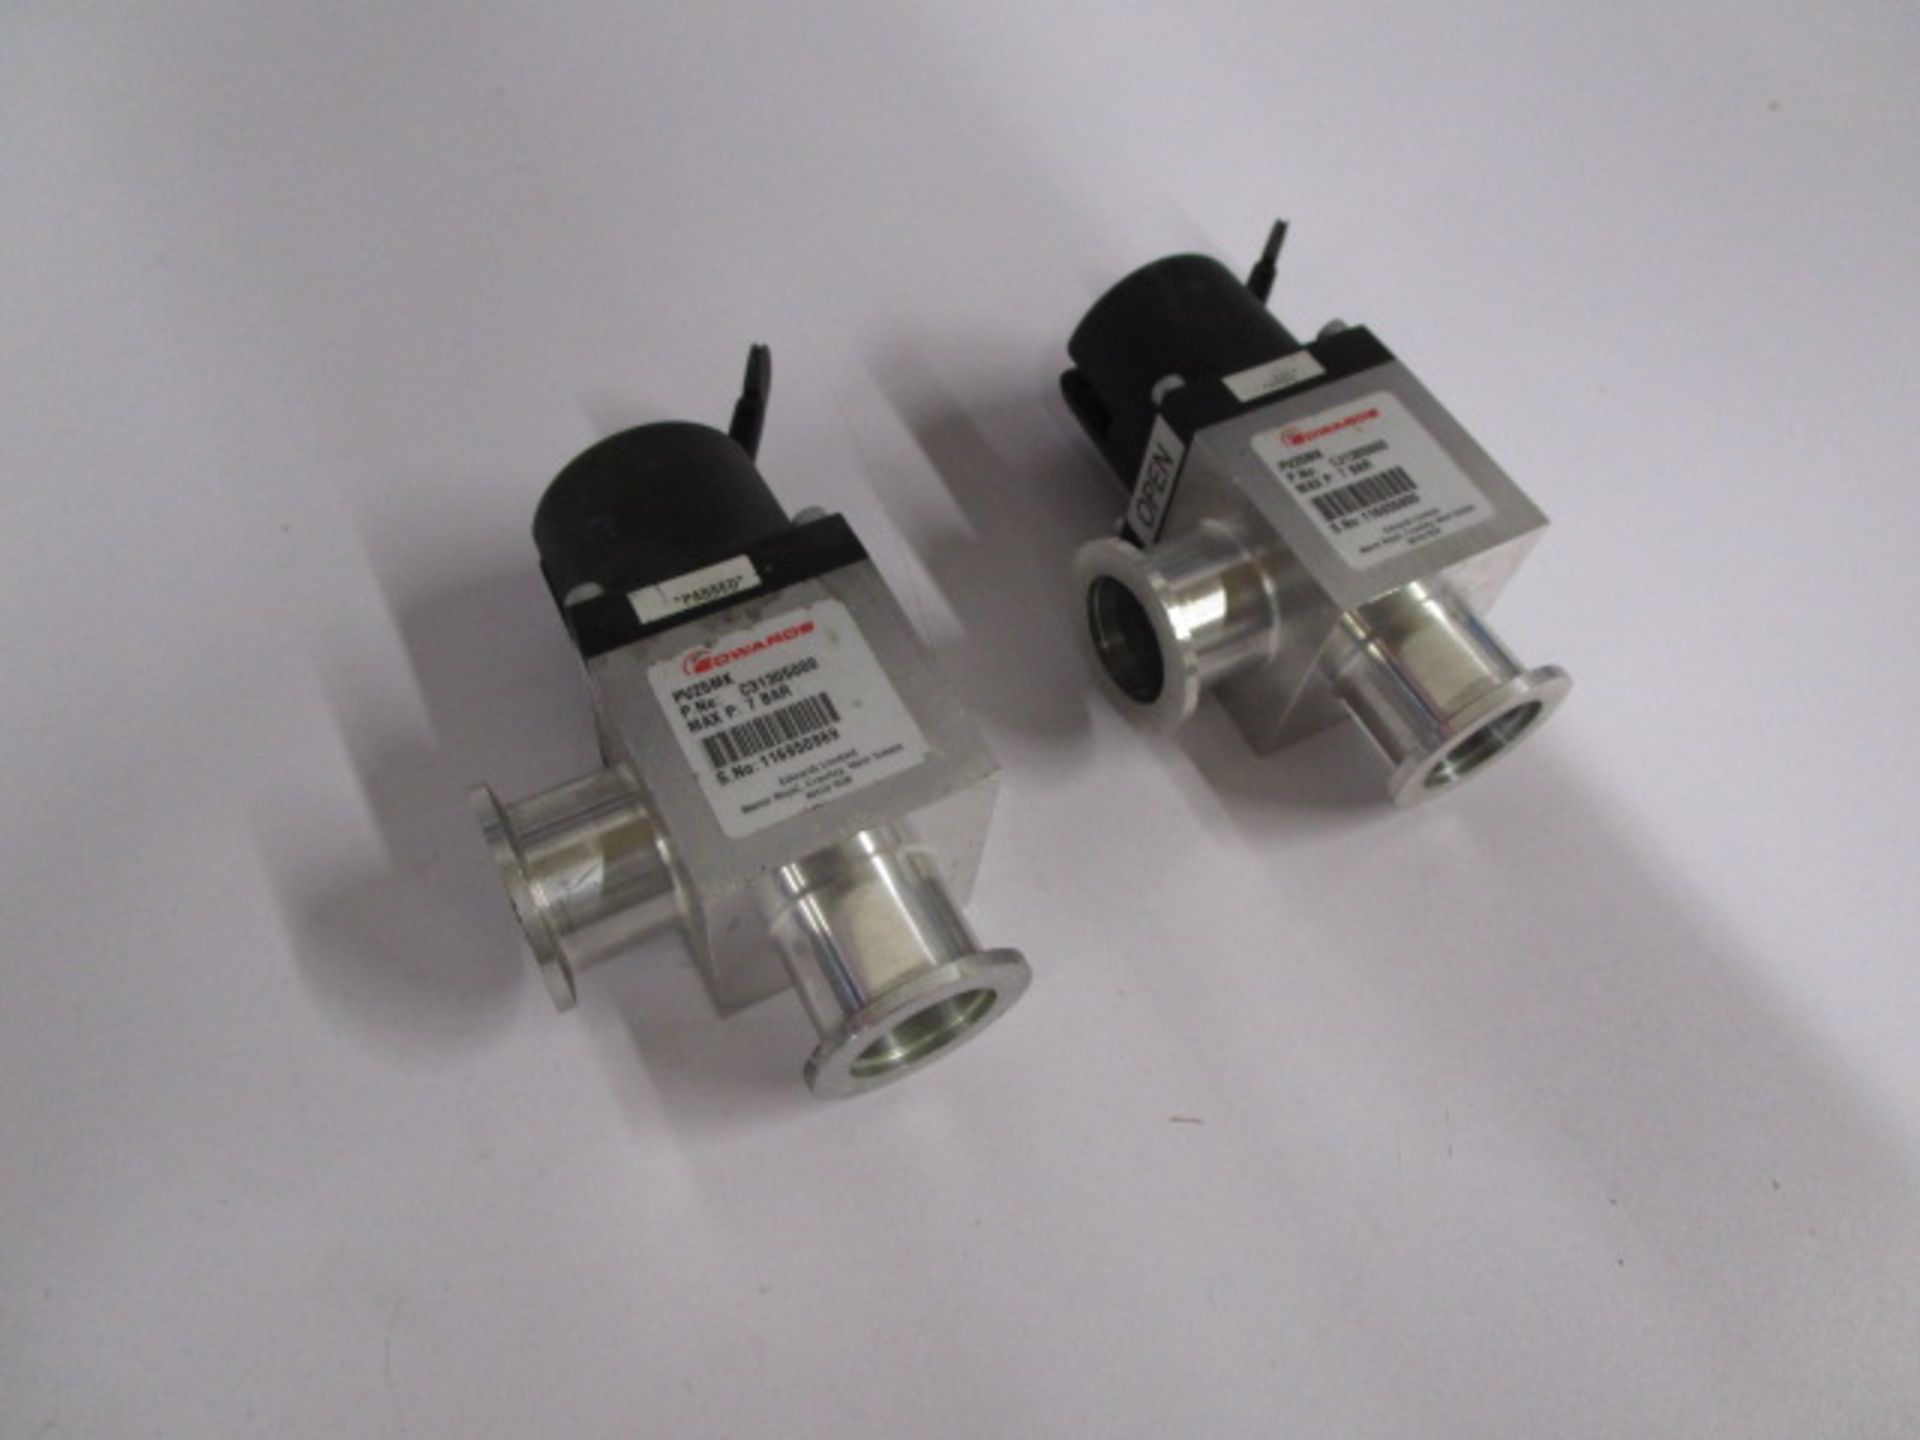 QUANTITY OF 2 EDWARDS PV25MK RIGHT ANGLE PIPELINE ISOLATION VALVE - Image 4 of 5